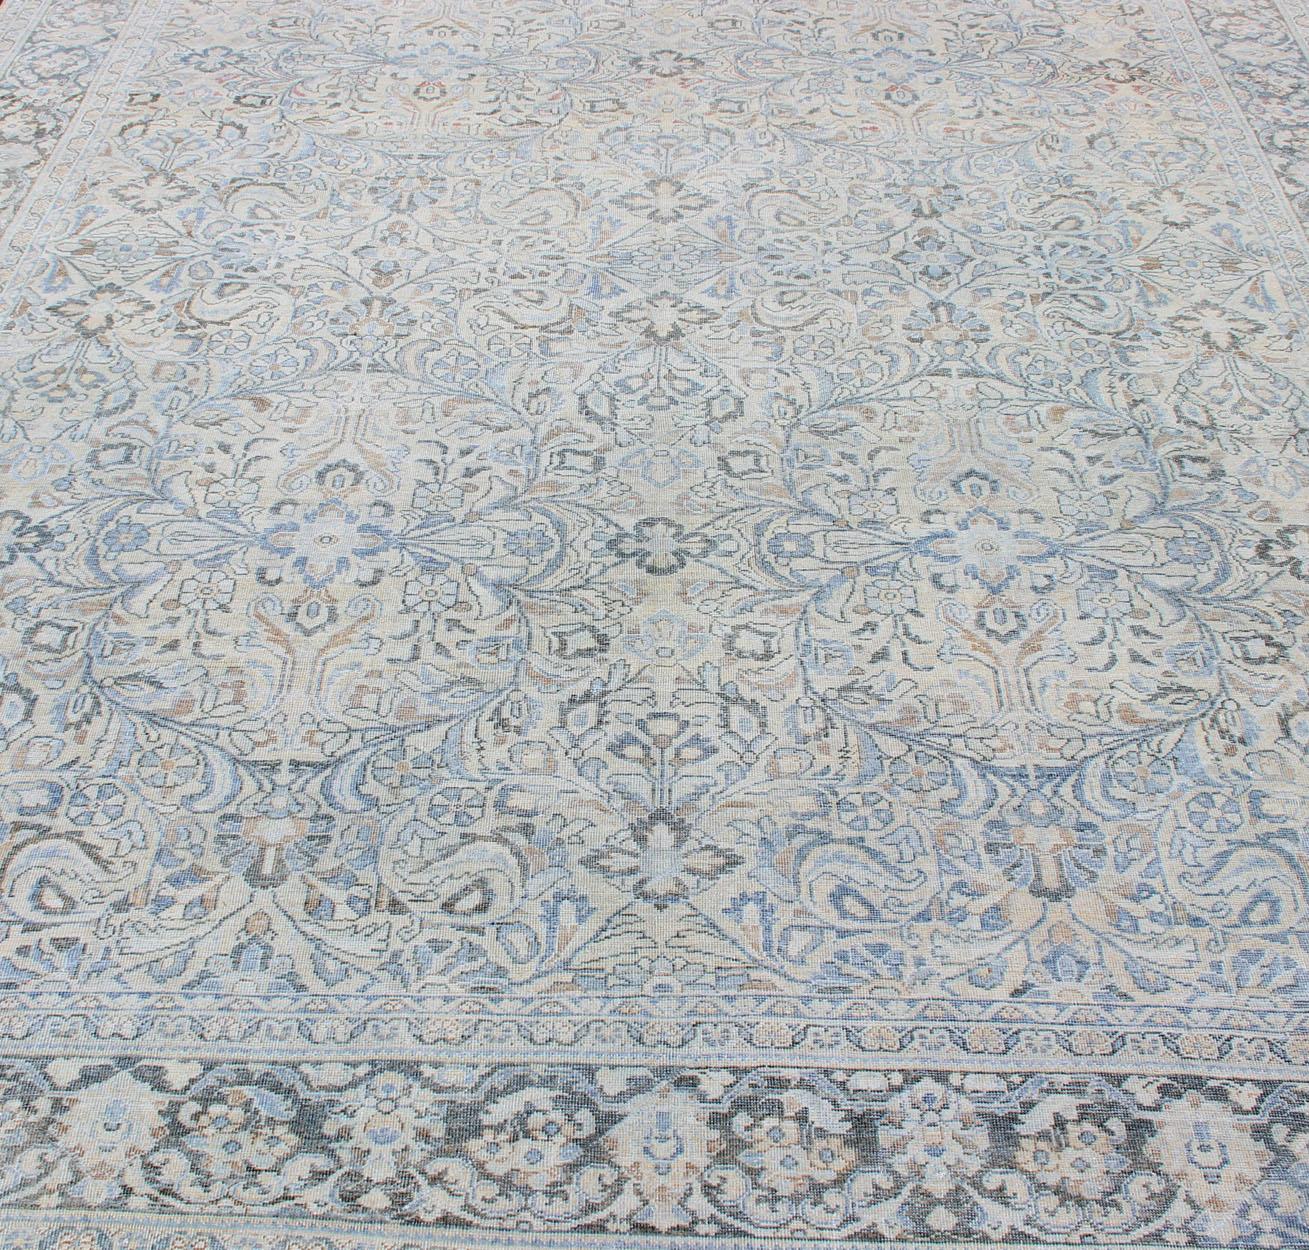 Antique Persian Mahal Rug with Sub Floral Design in Blue, Charcoal & Cream 2